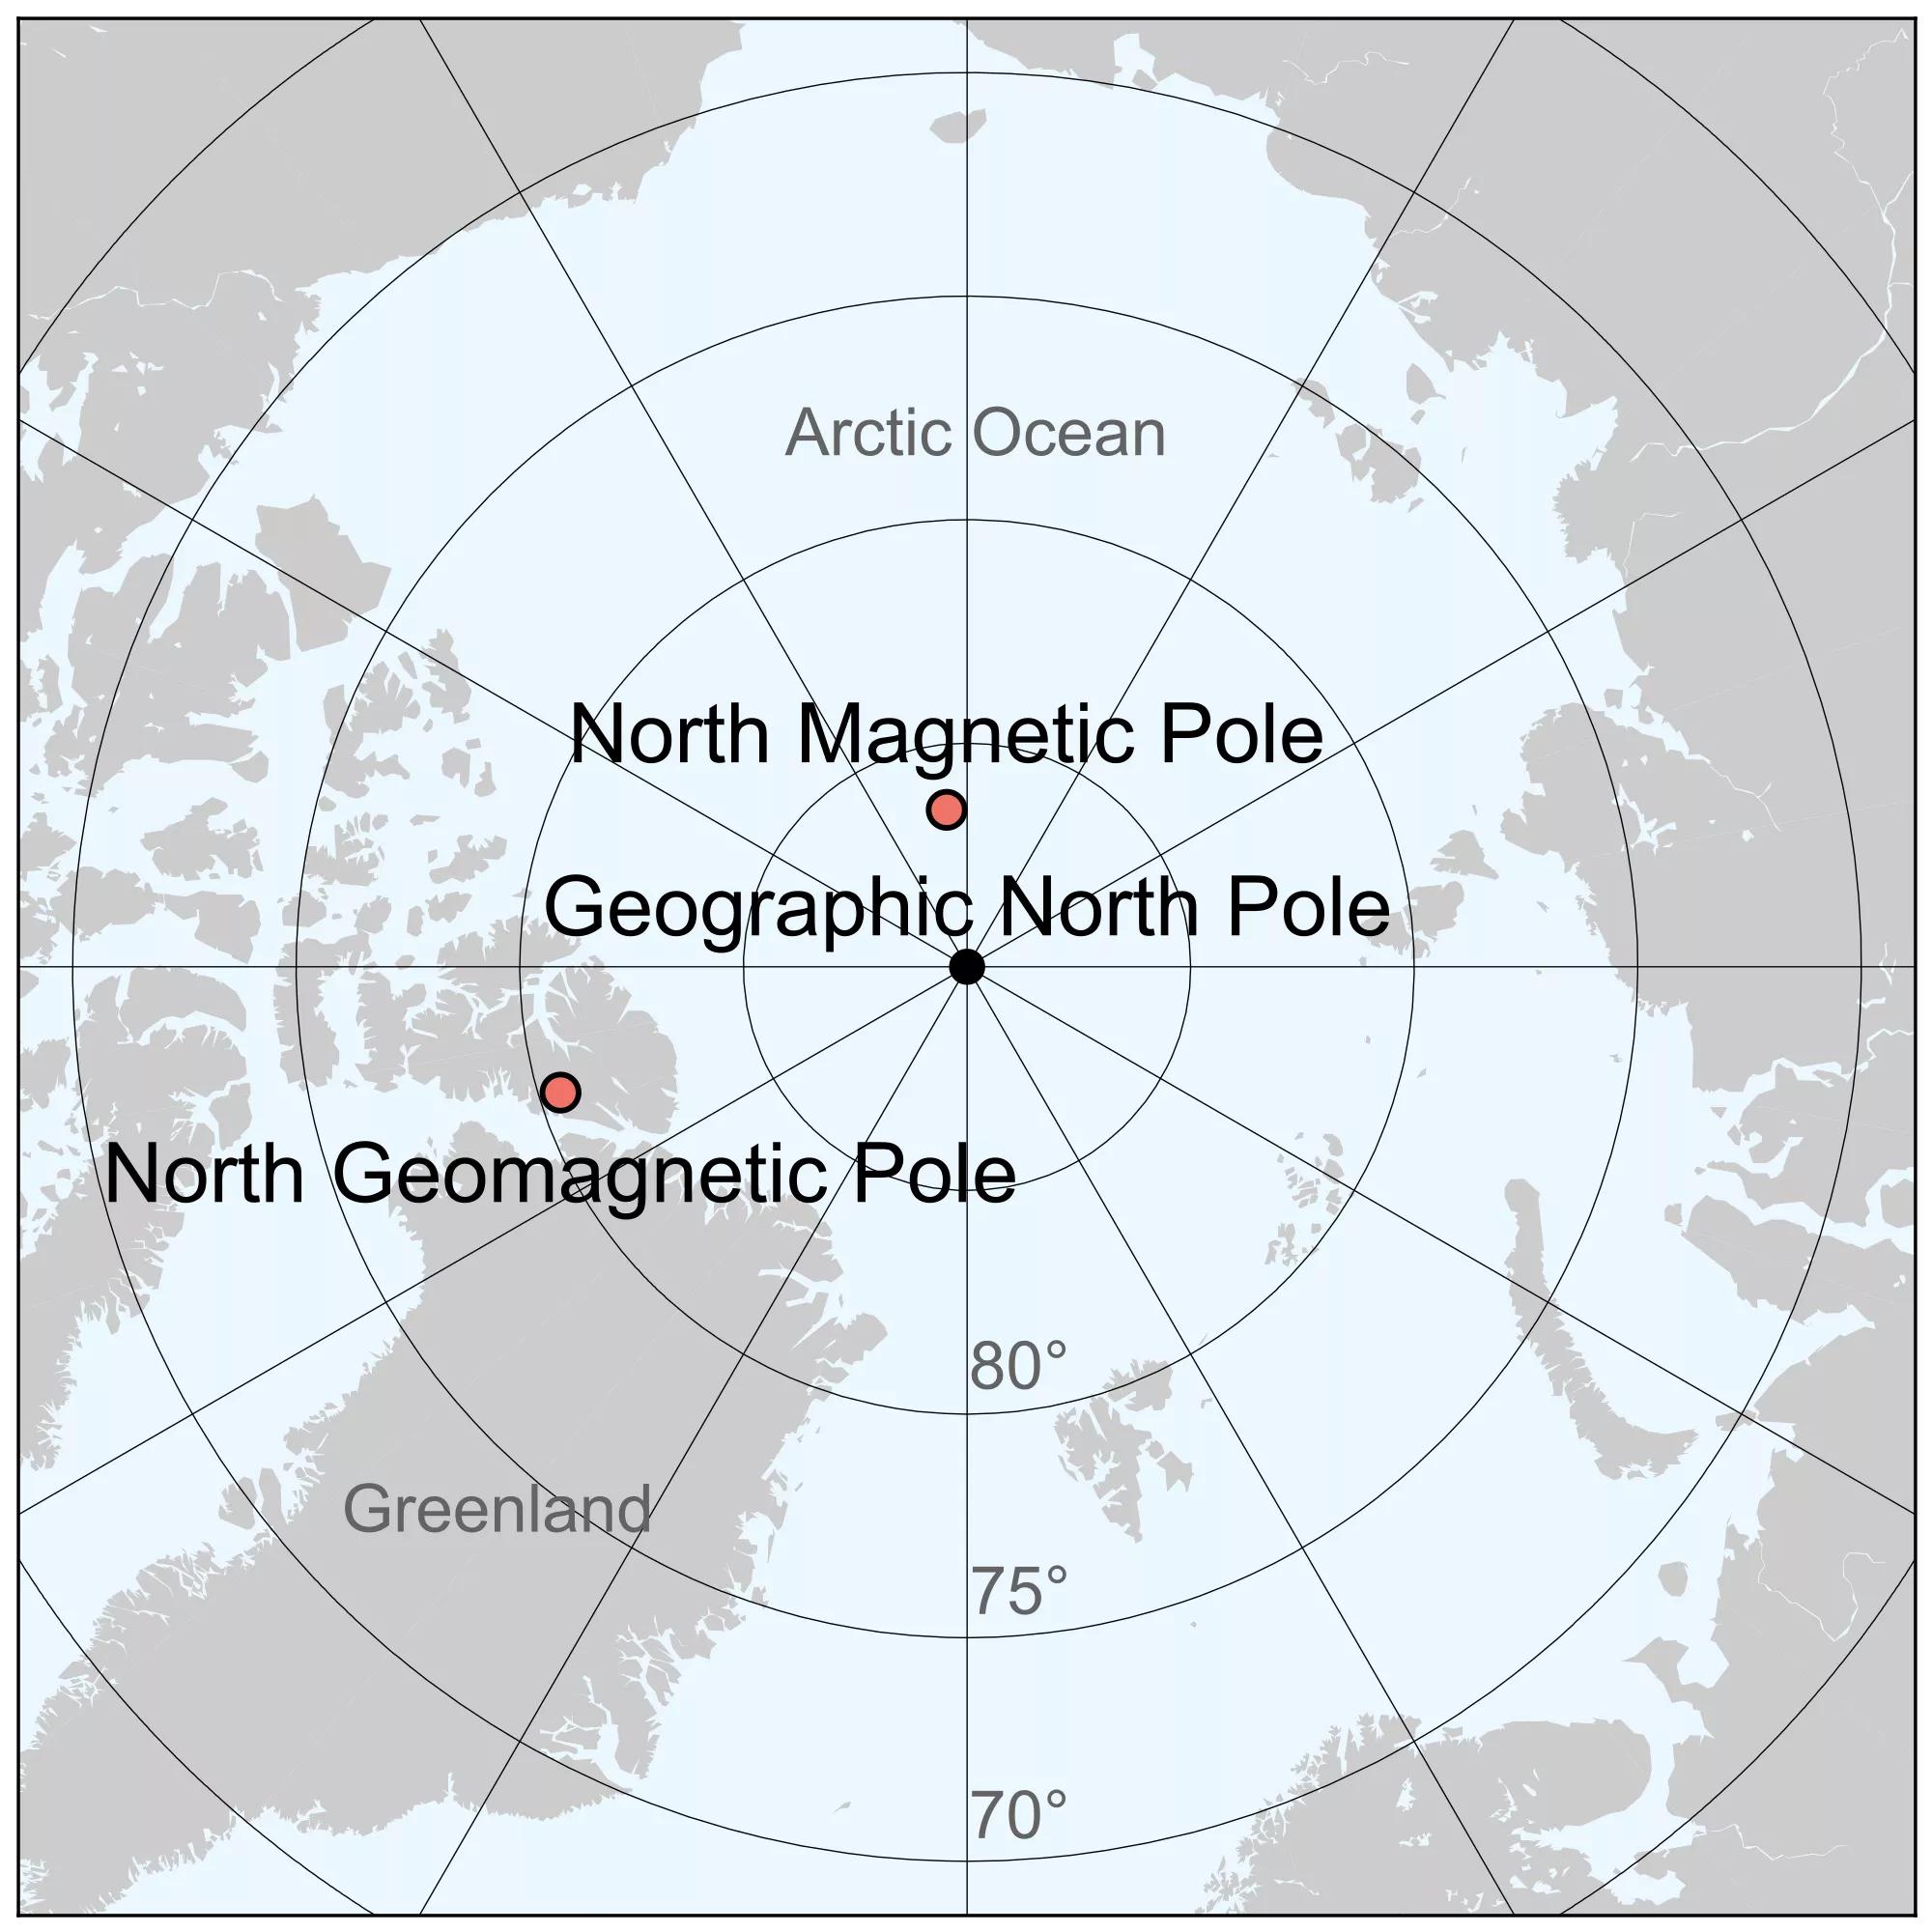 Diagram that differentiates between geographic north pole, magnetic north pole, and geomagnetic north pole.